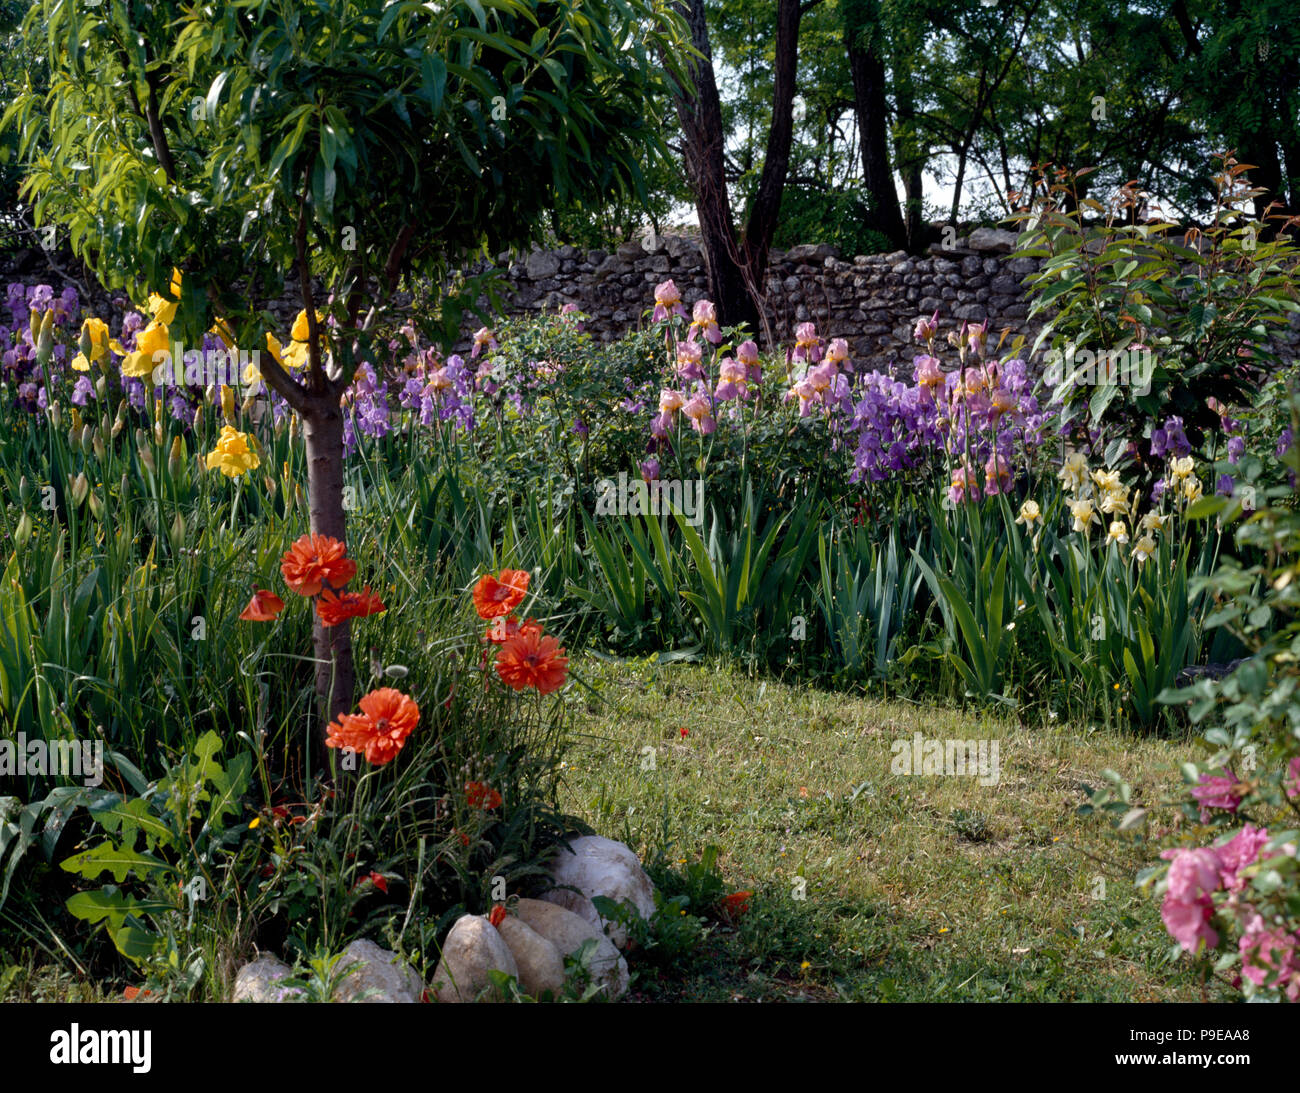 Small tree under-planted with red oriental poppies in country garden with borders of pink and mauve iris Stock Photo